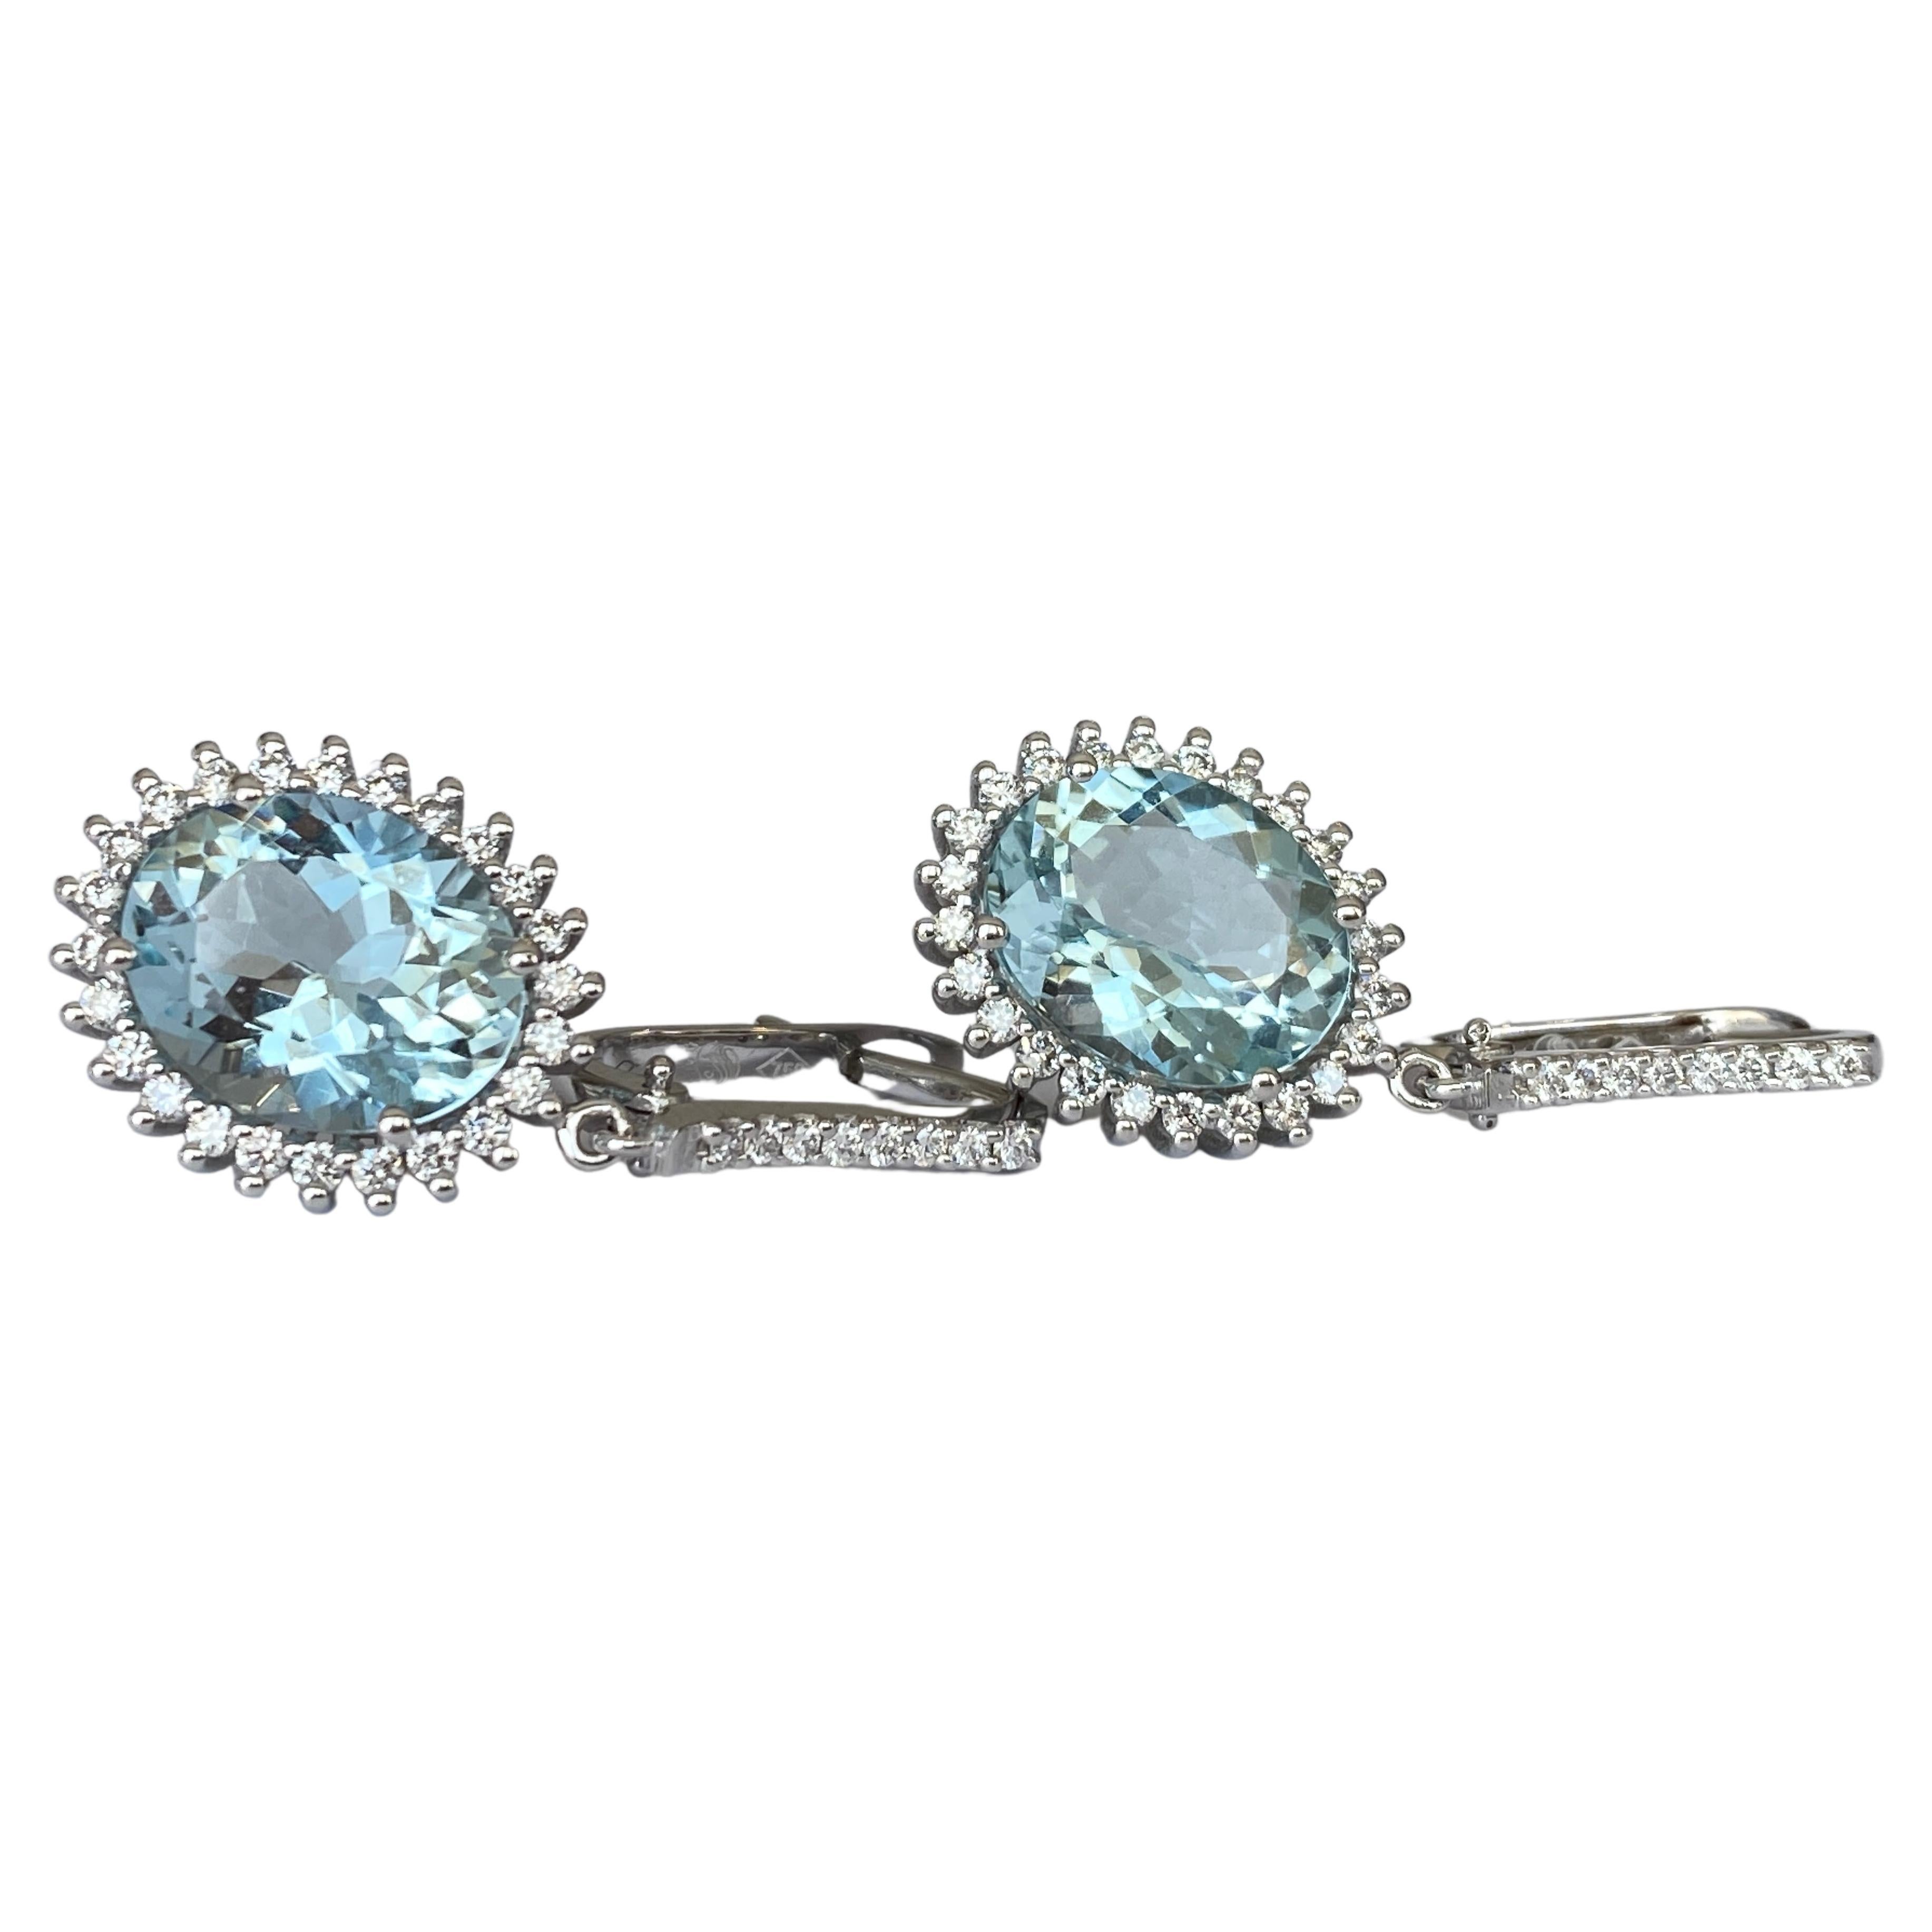 18 Kt. White Gold Earrings with 6.02 Ct Aquamarine and Diamonds